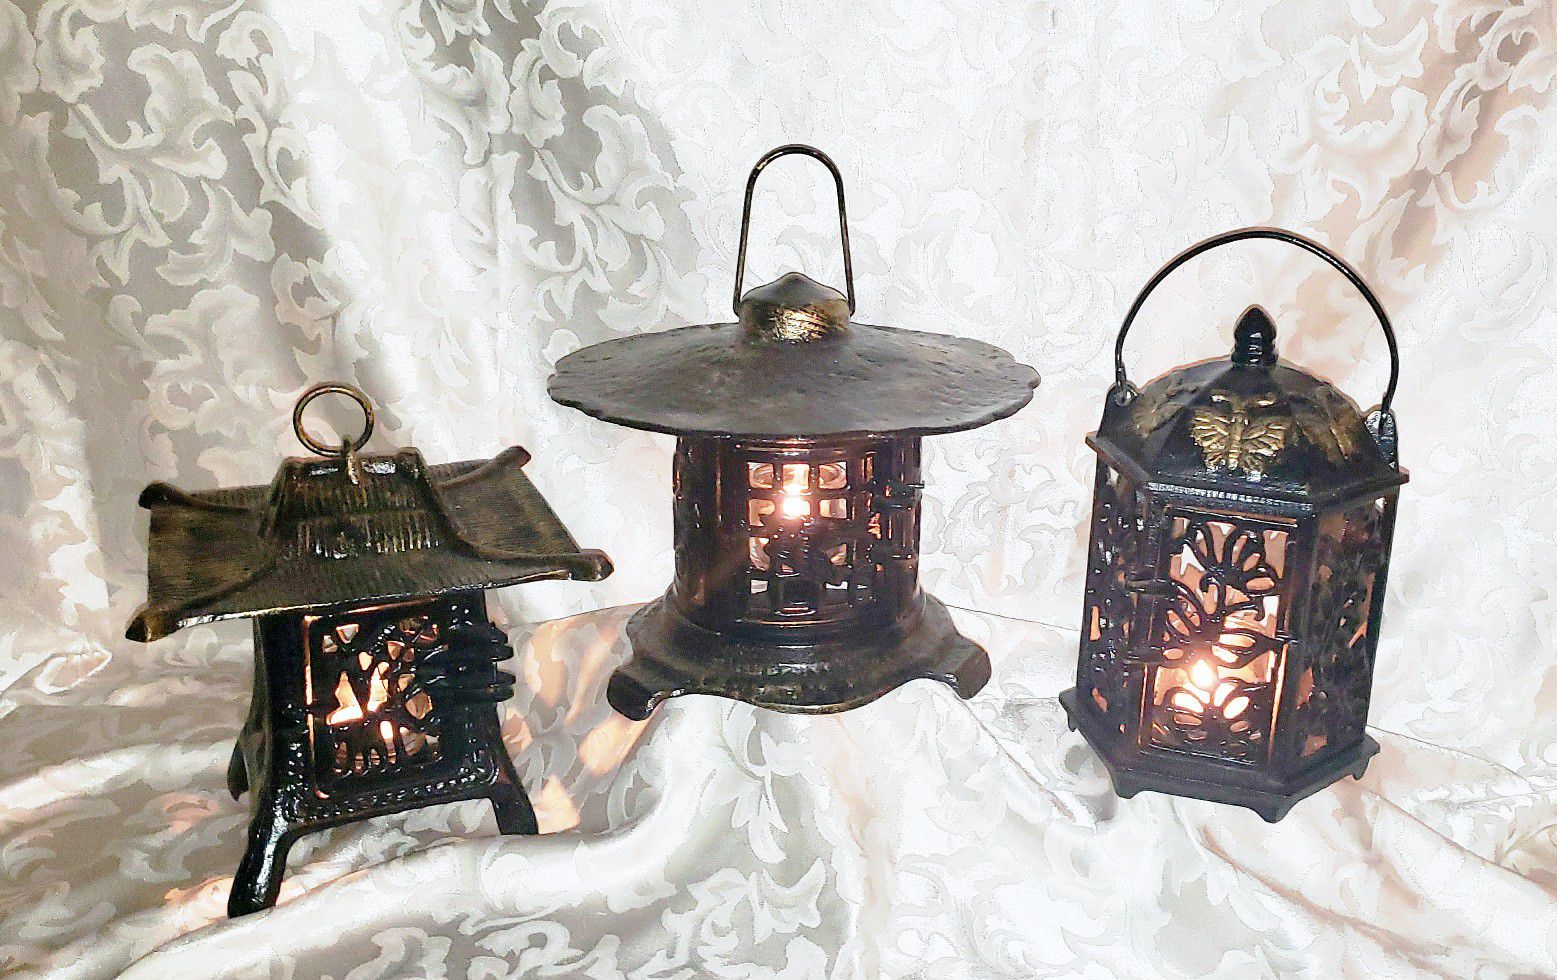 3 Japanese Cast Iron Lanterns Lamps Hanging Garden Candle Holders 3 Pagoda Styles Refurbished & Restored Glossy Black w/Golden Highlights